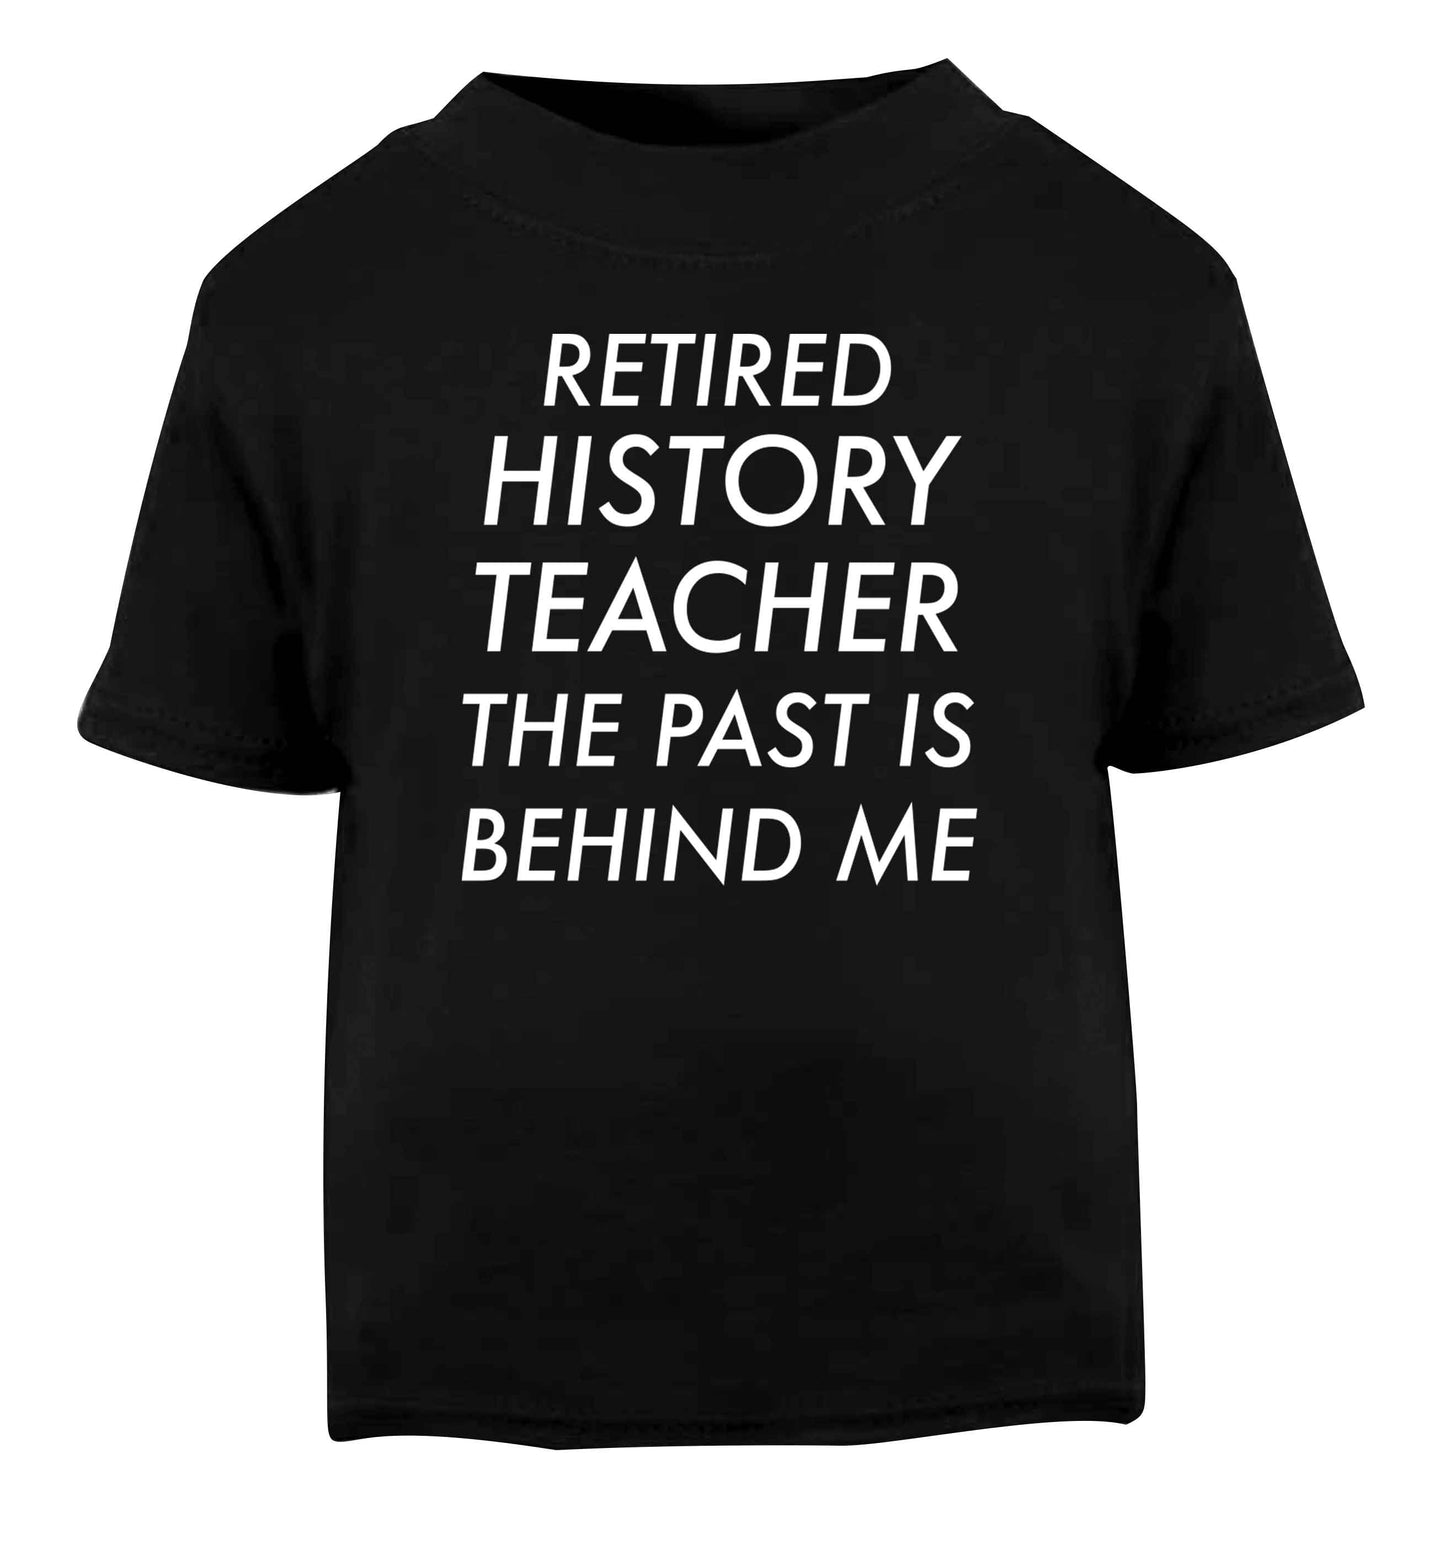 Retired history teacher the past is behind me Black Baby Toddler Tshirt 2 years